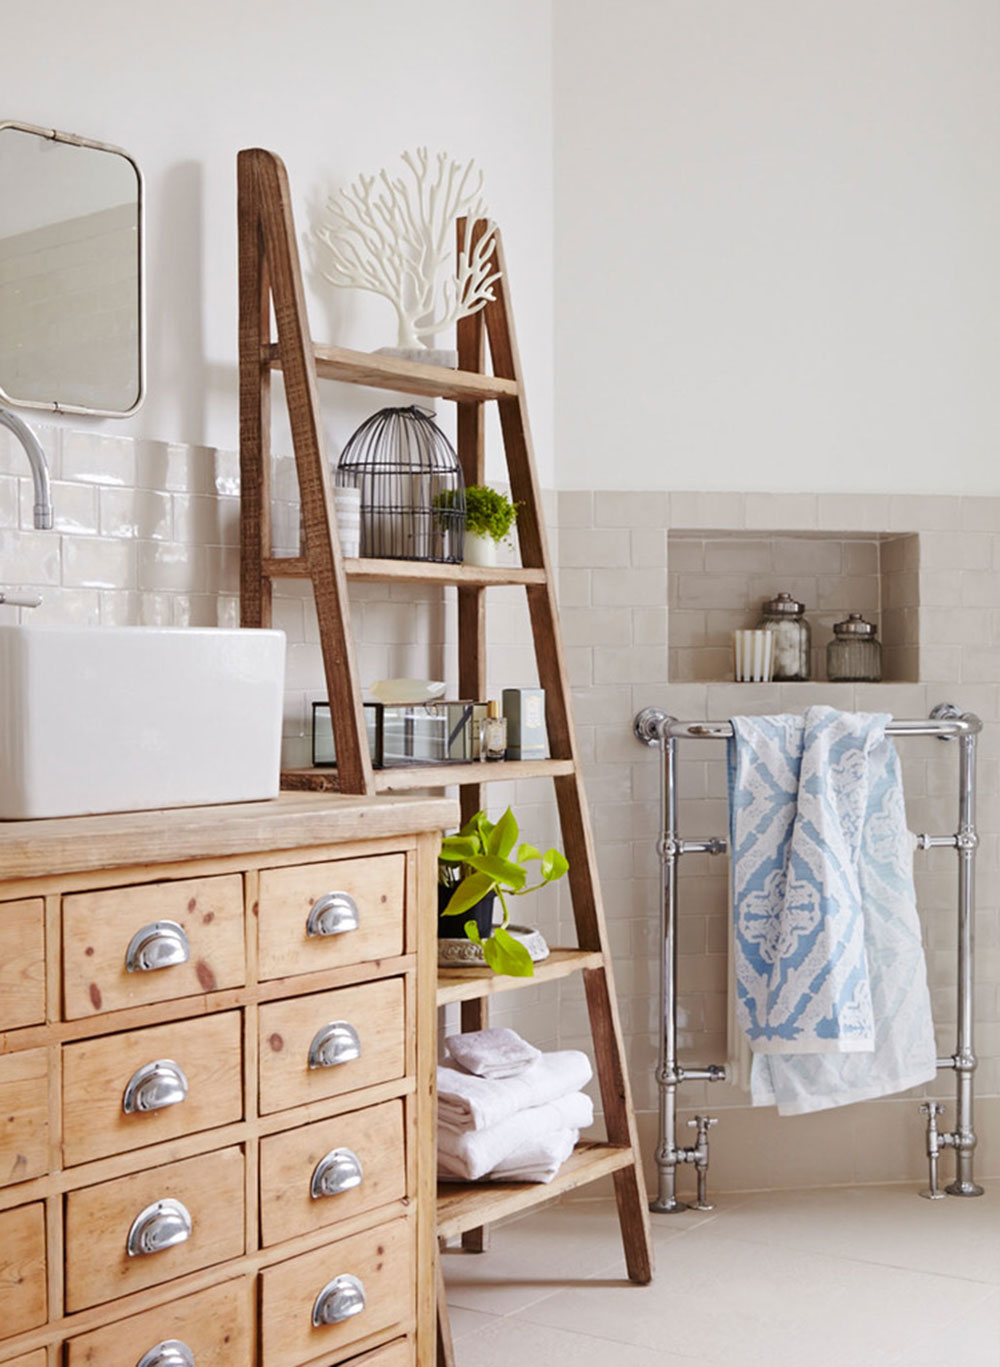 East-London-Villa-by-Run-for-the-Hills Small bathroom shelf ideas to optimize your bathroom space